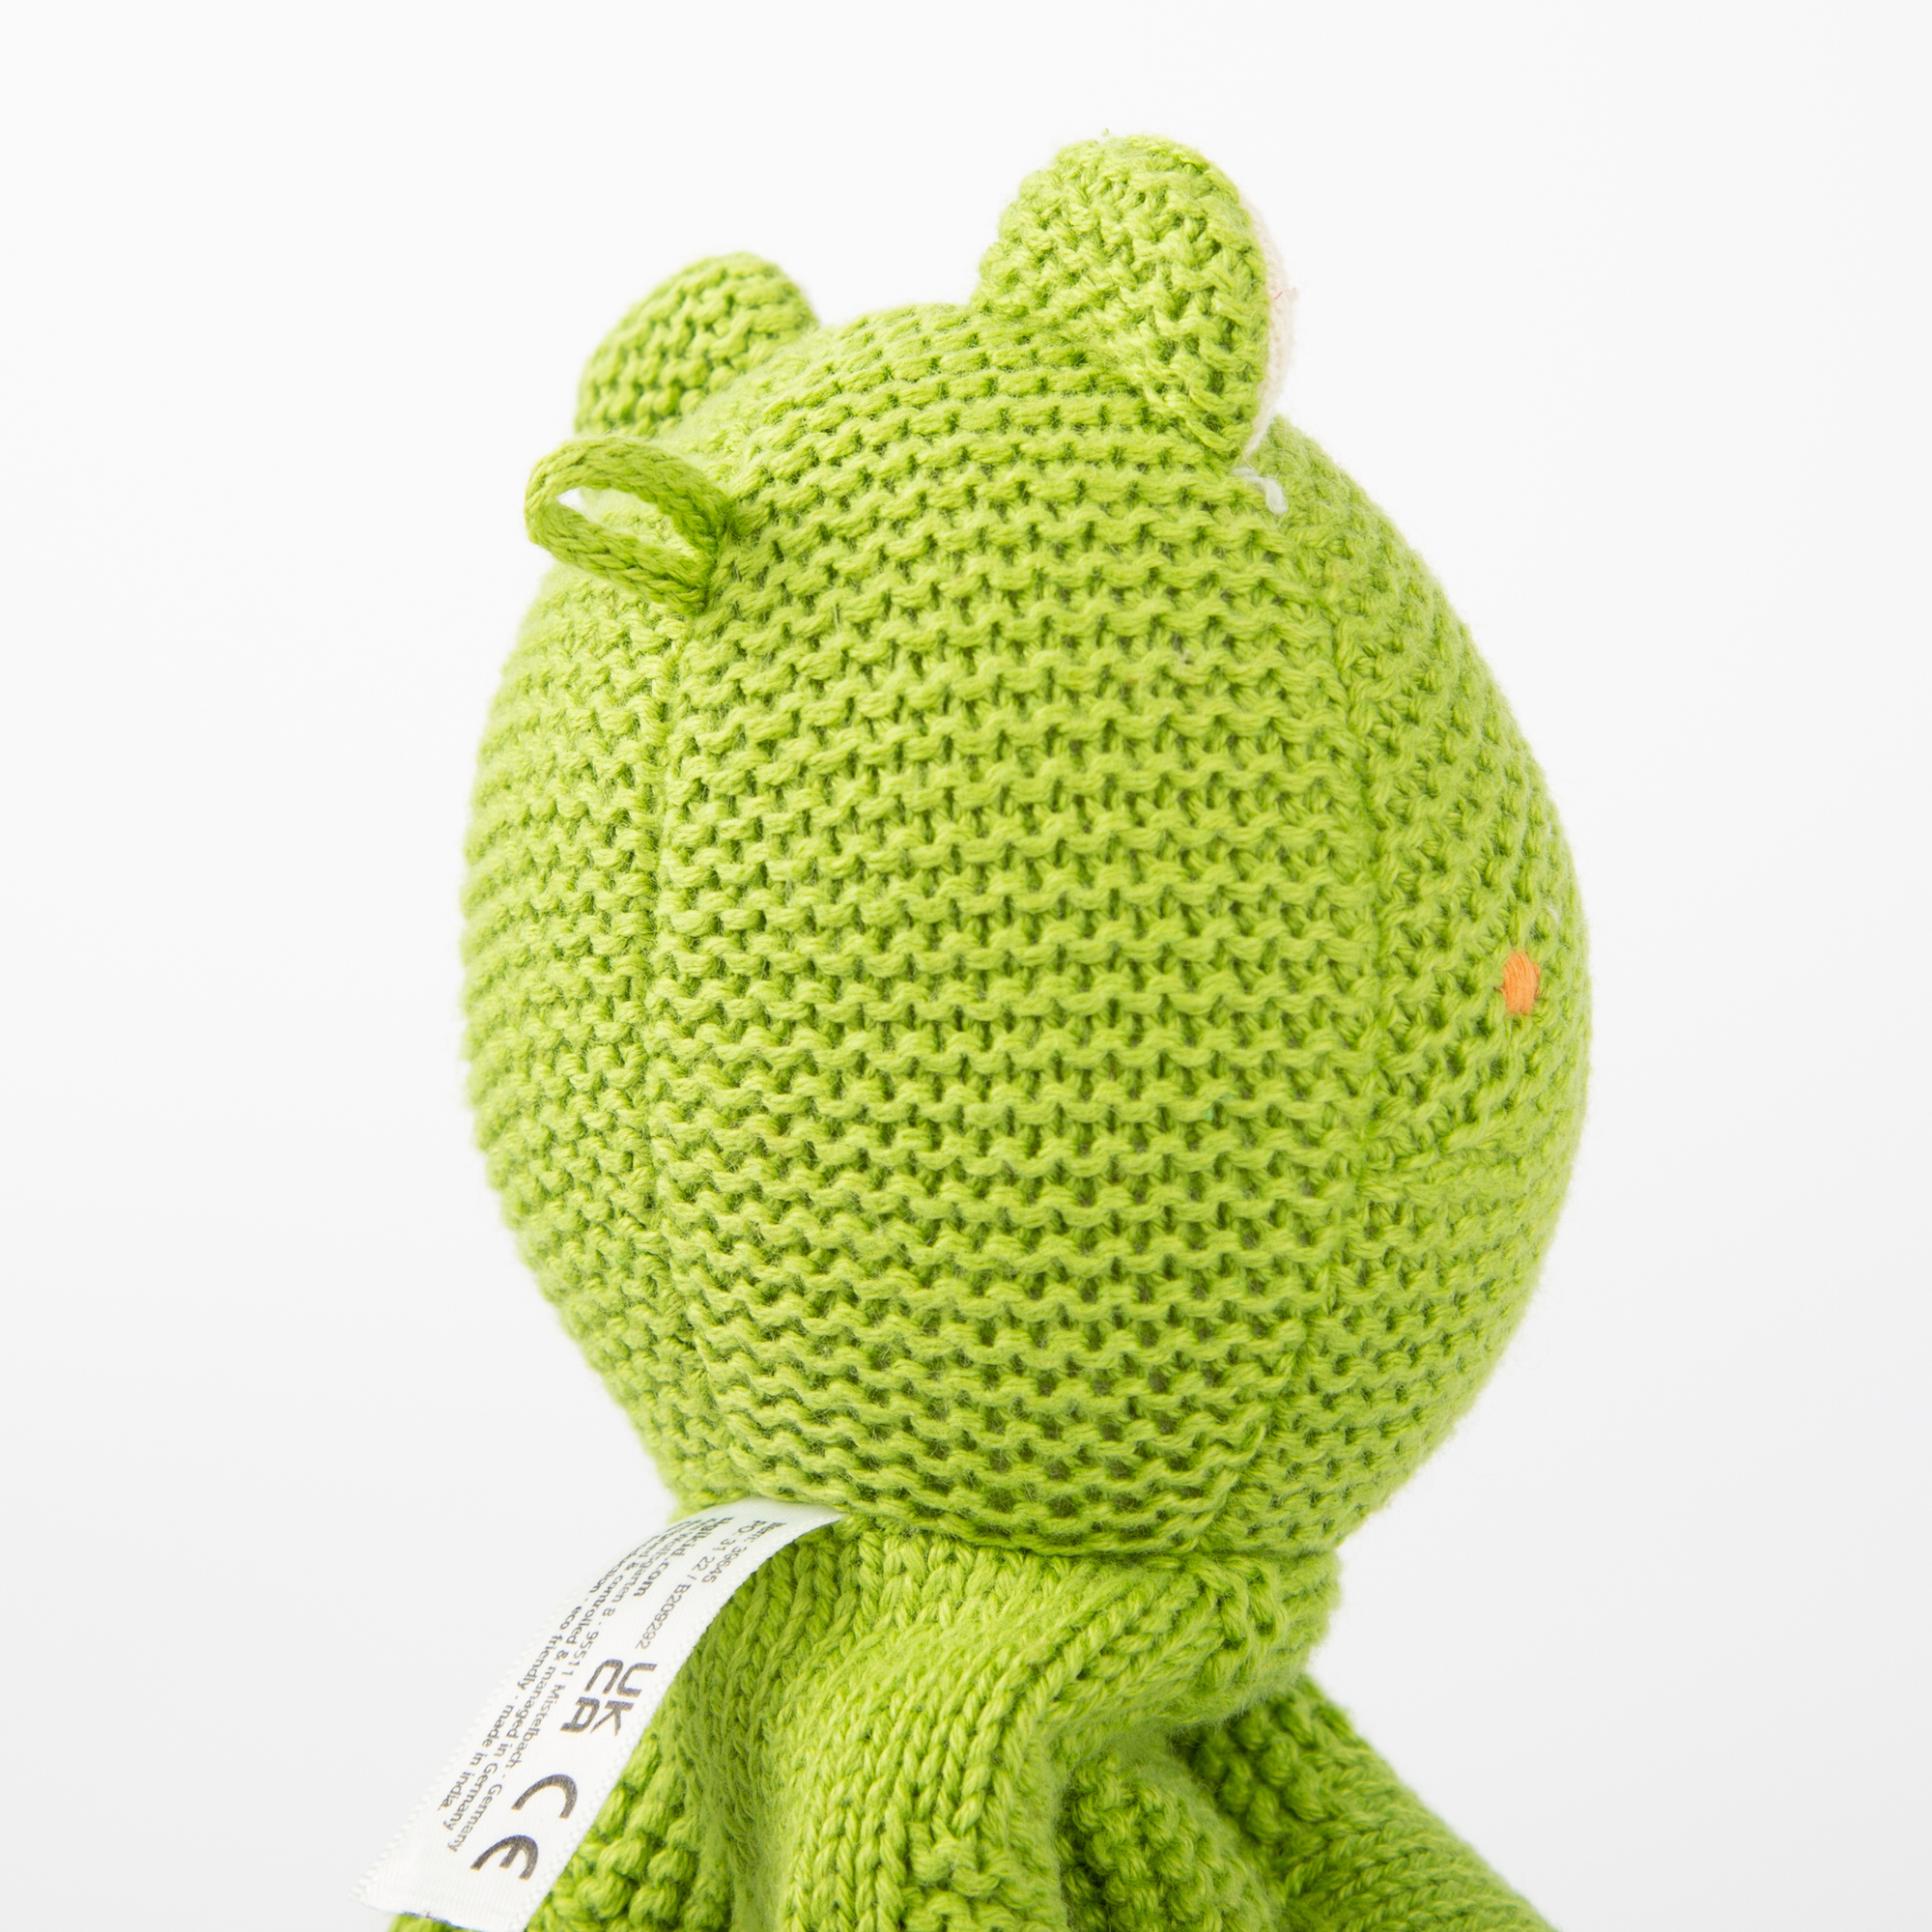 Large baby lovey frog, green, Knitted Love